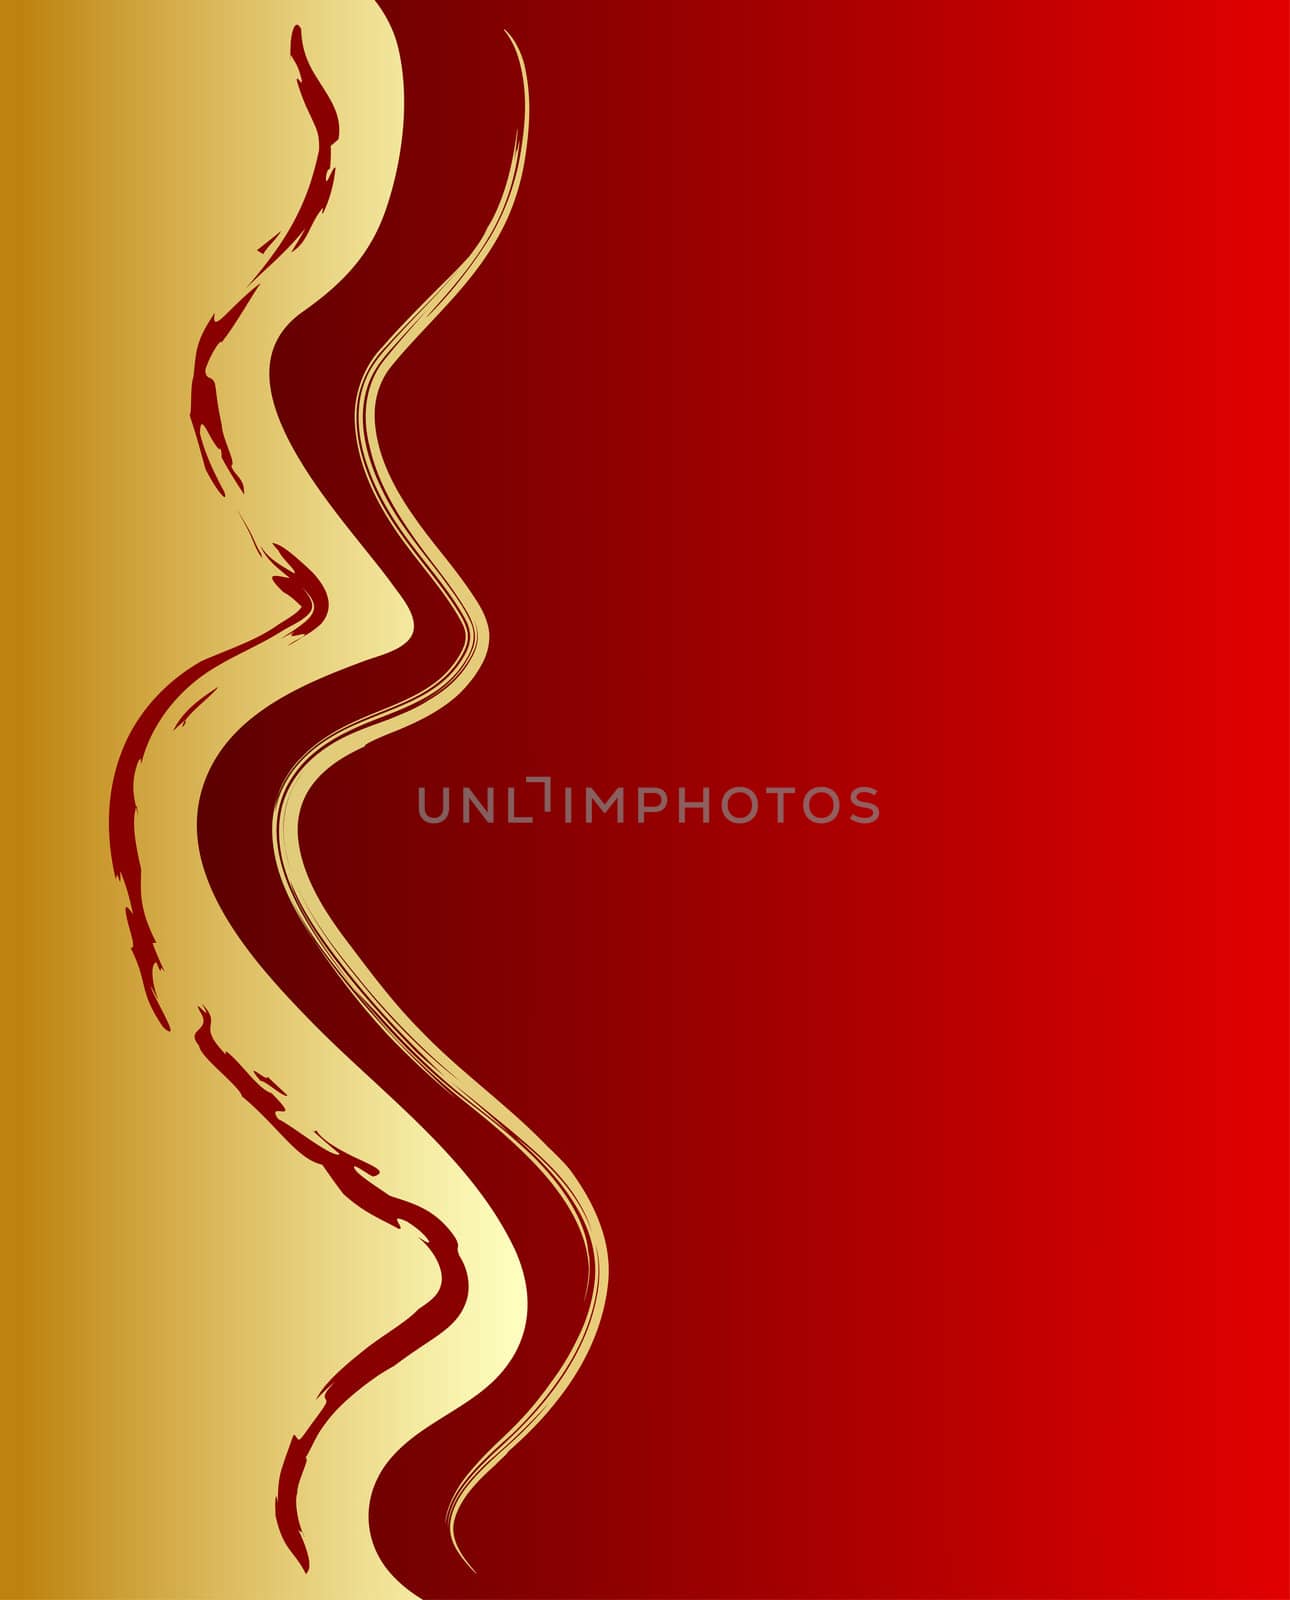 illustration of a red abstract decoration background by peromarketing